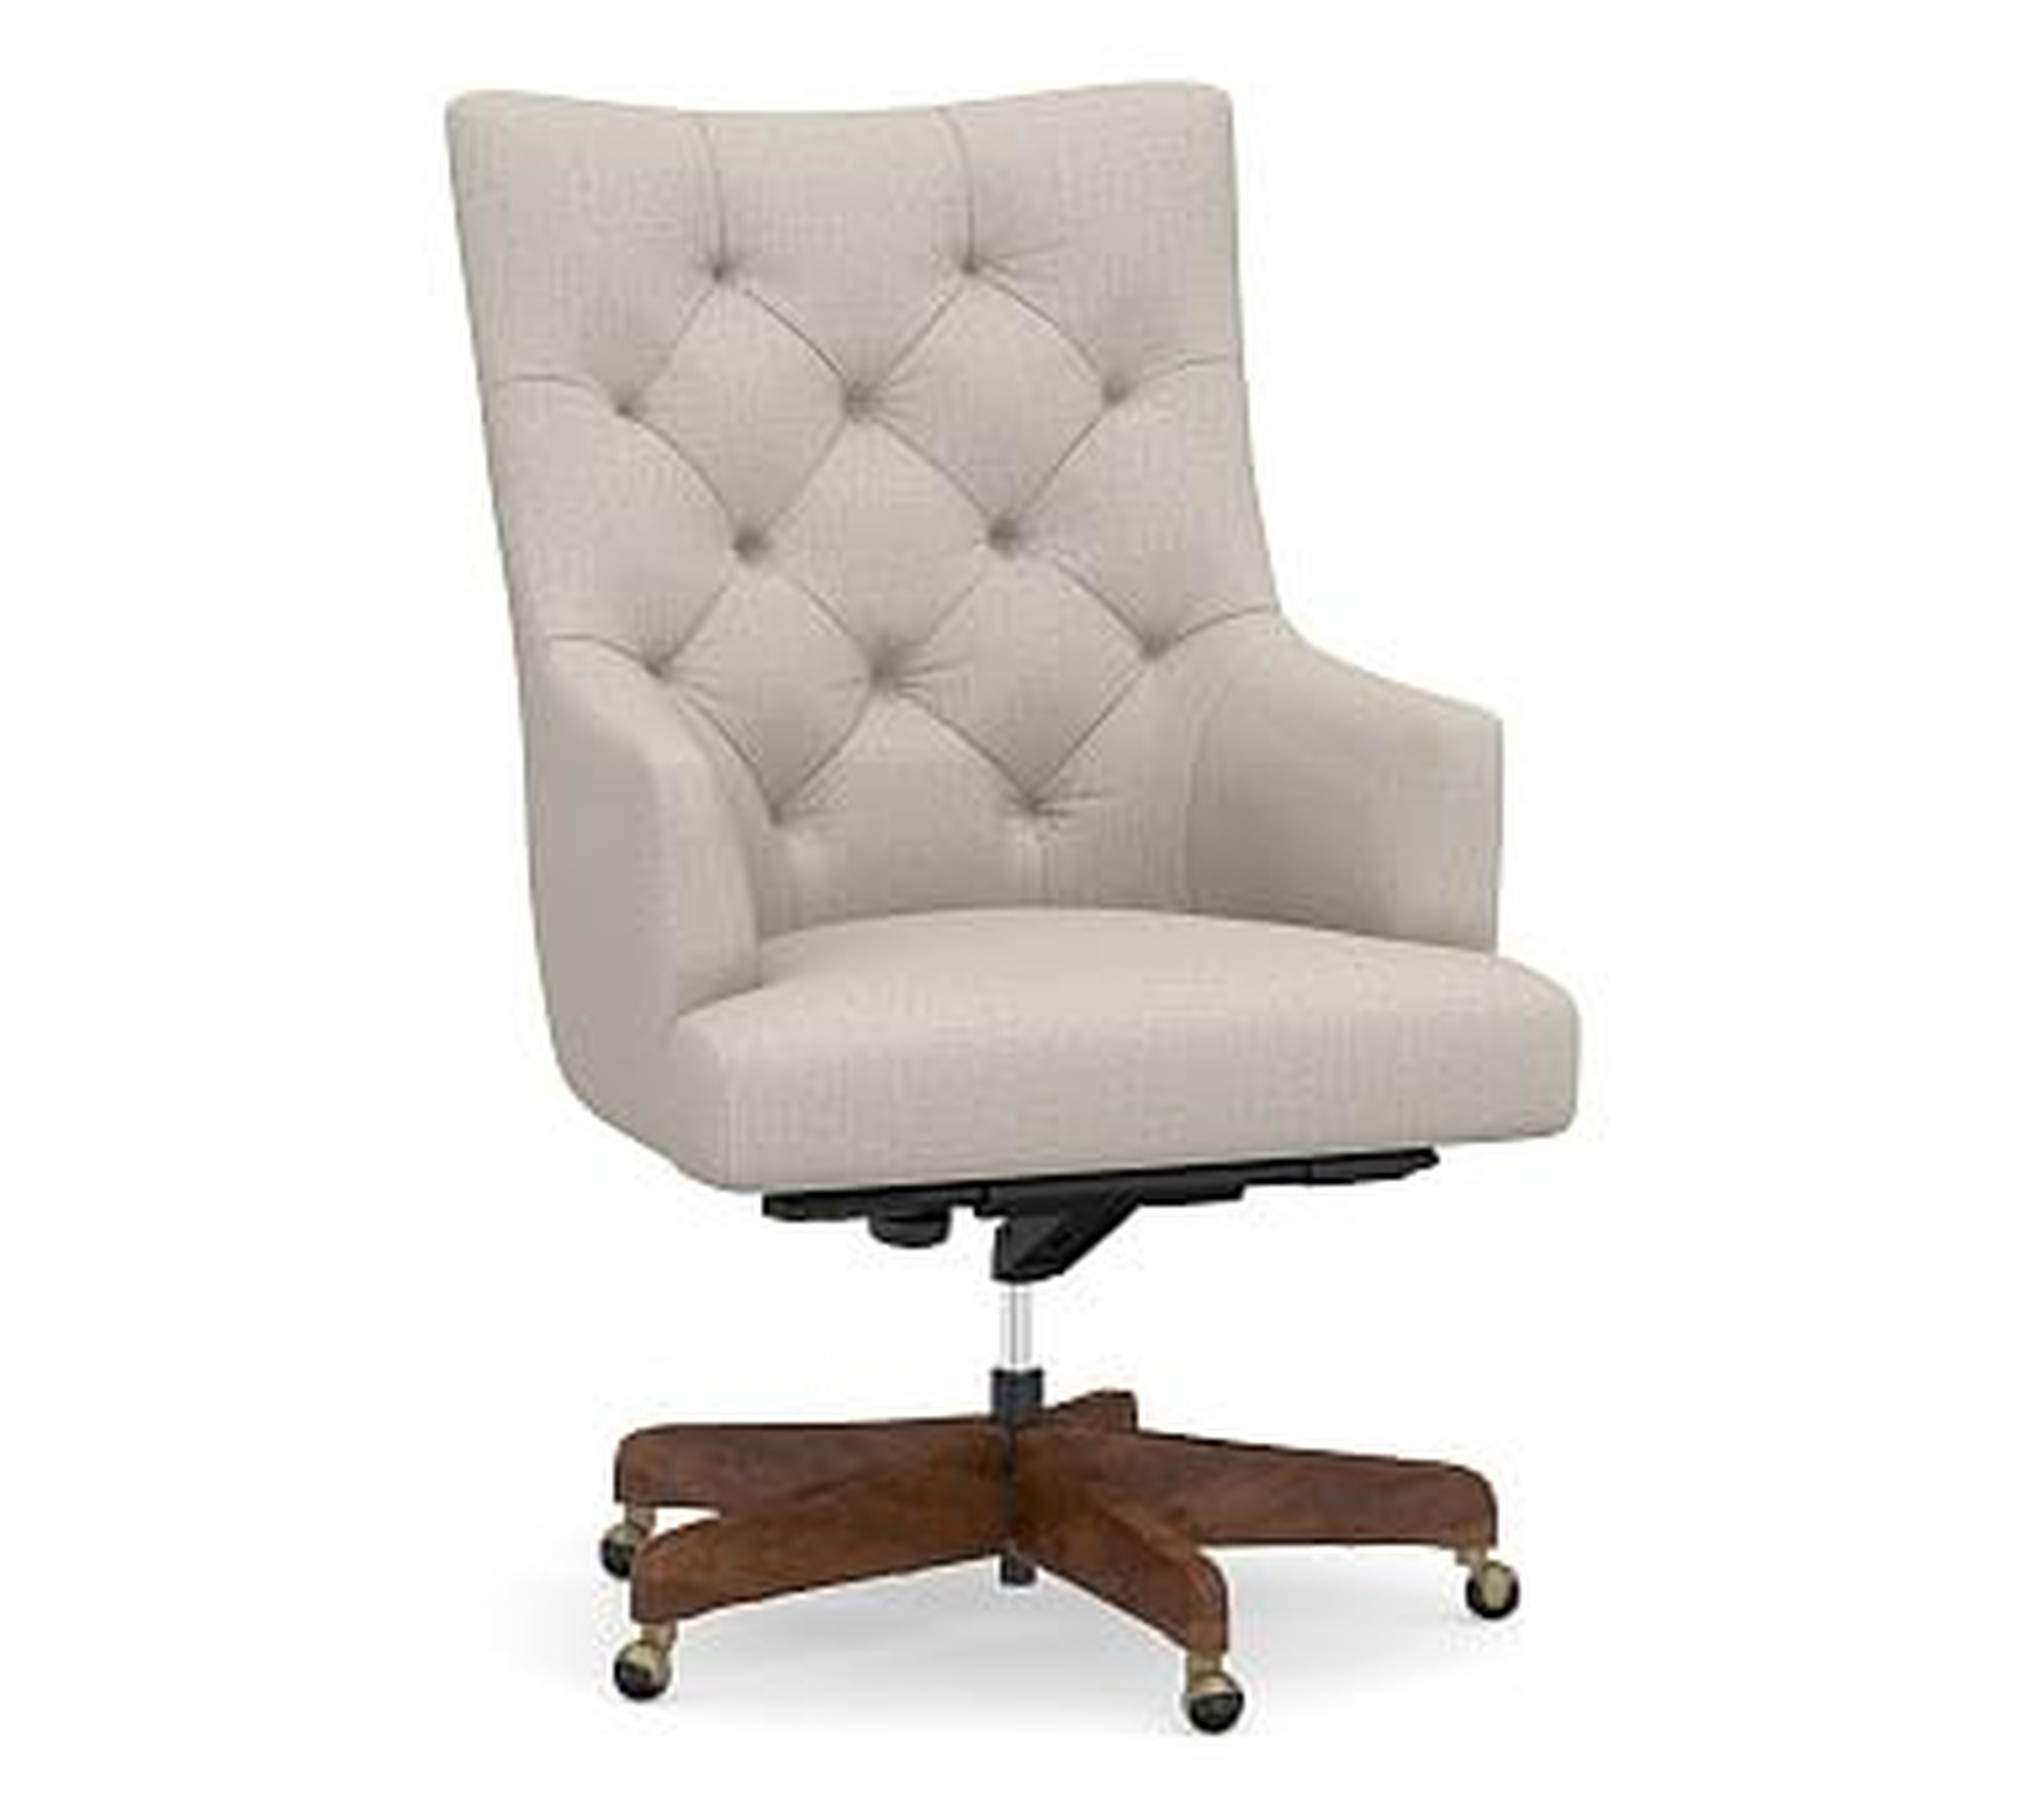 Radcliffe Tufted Upholstered Swivel Desk Chair, Rustic Brown Base, Performance Heathered Tweed Pebble - Pottery Barn